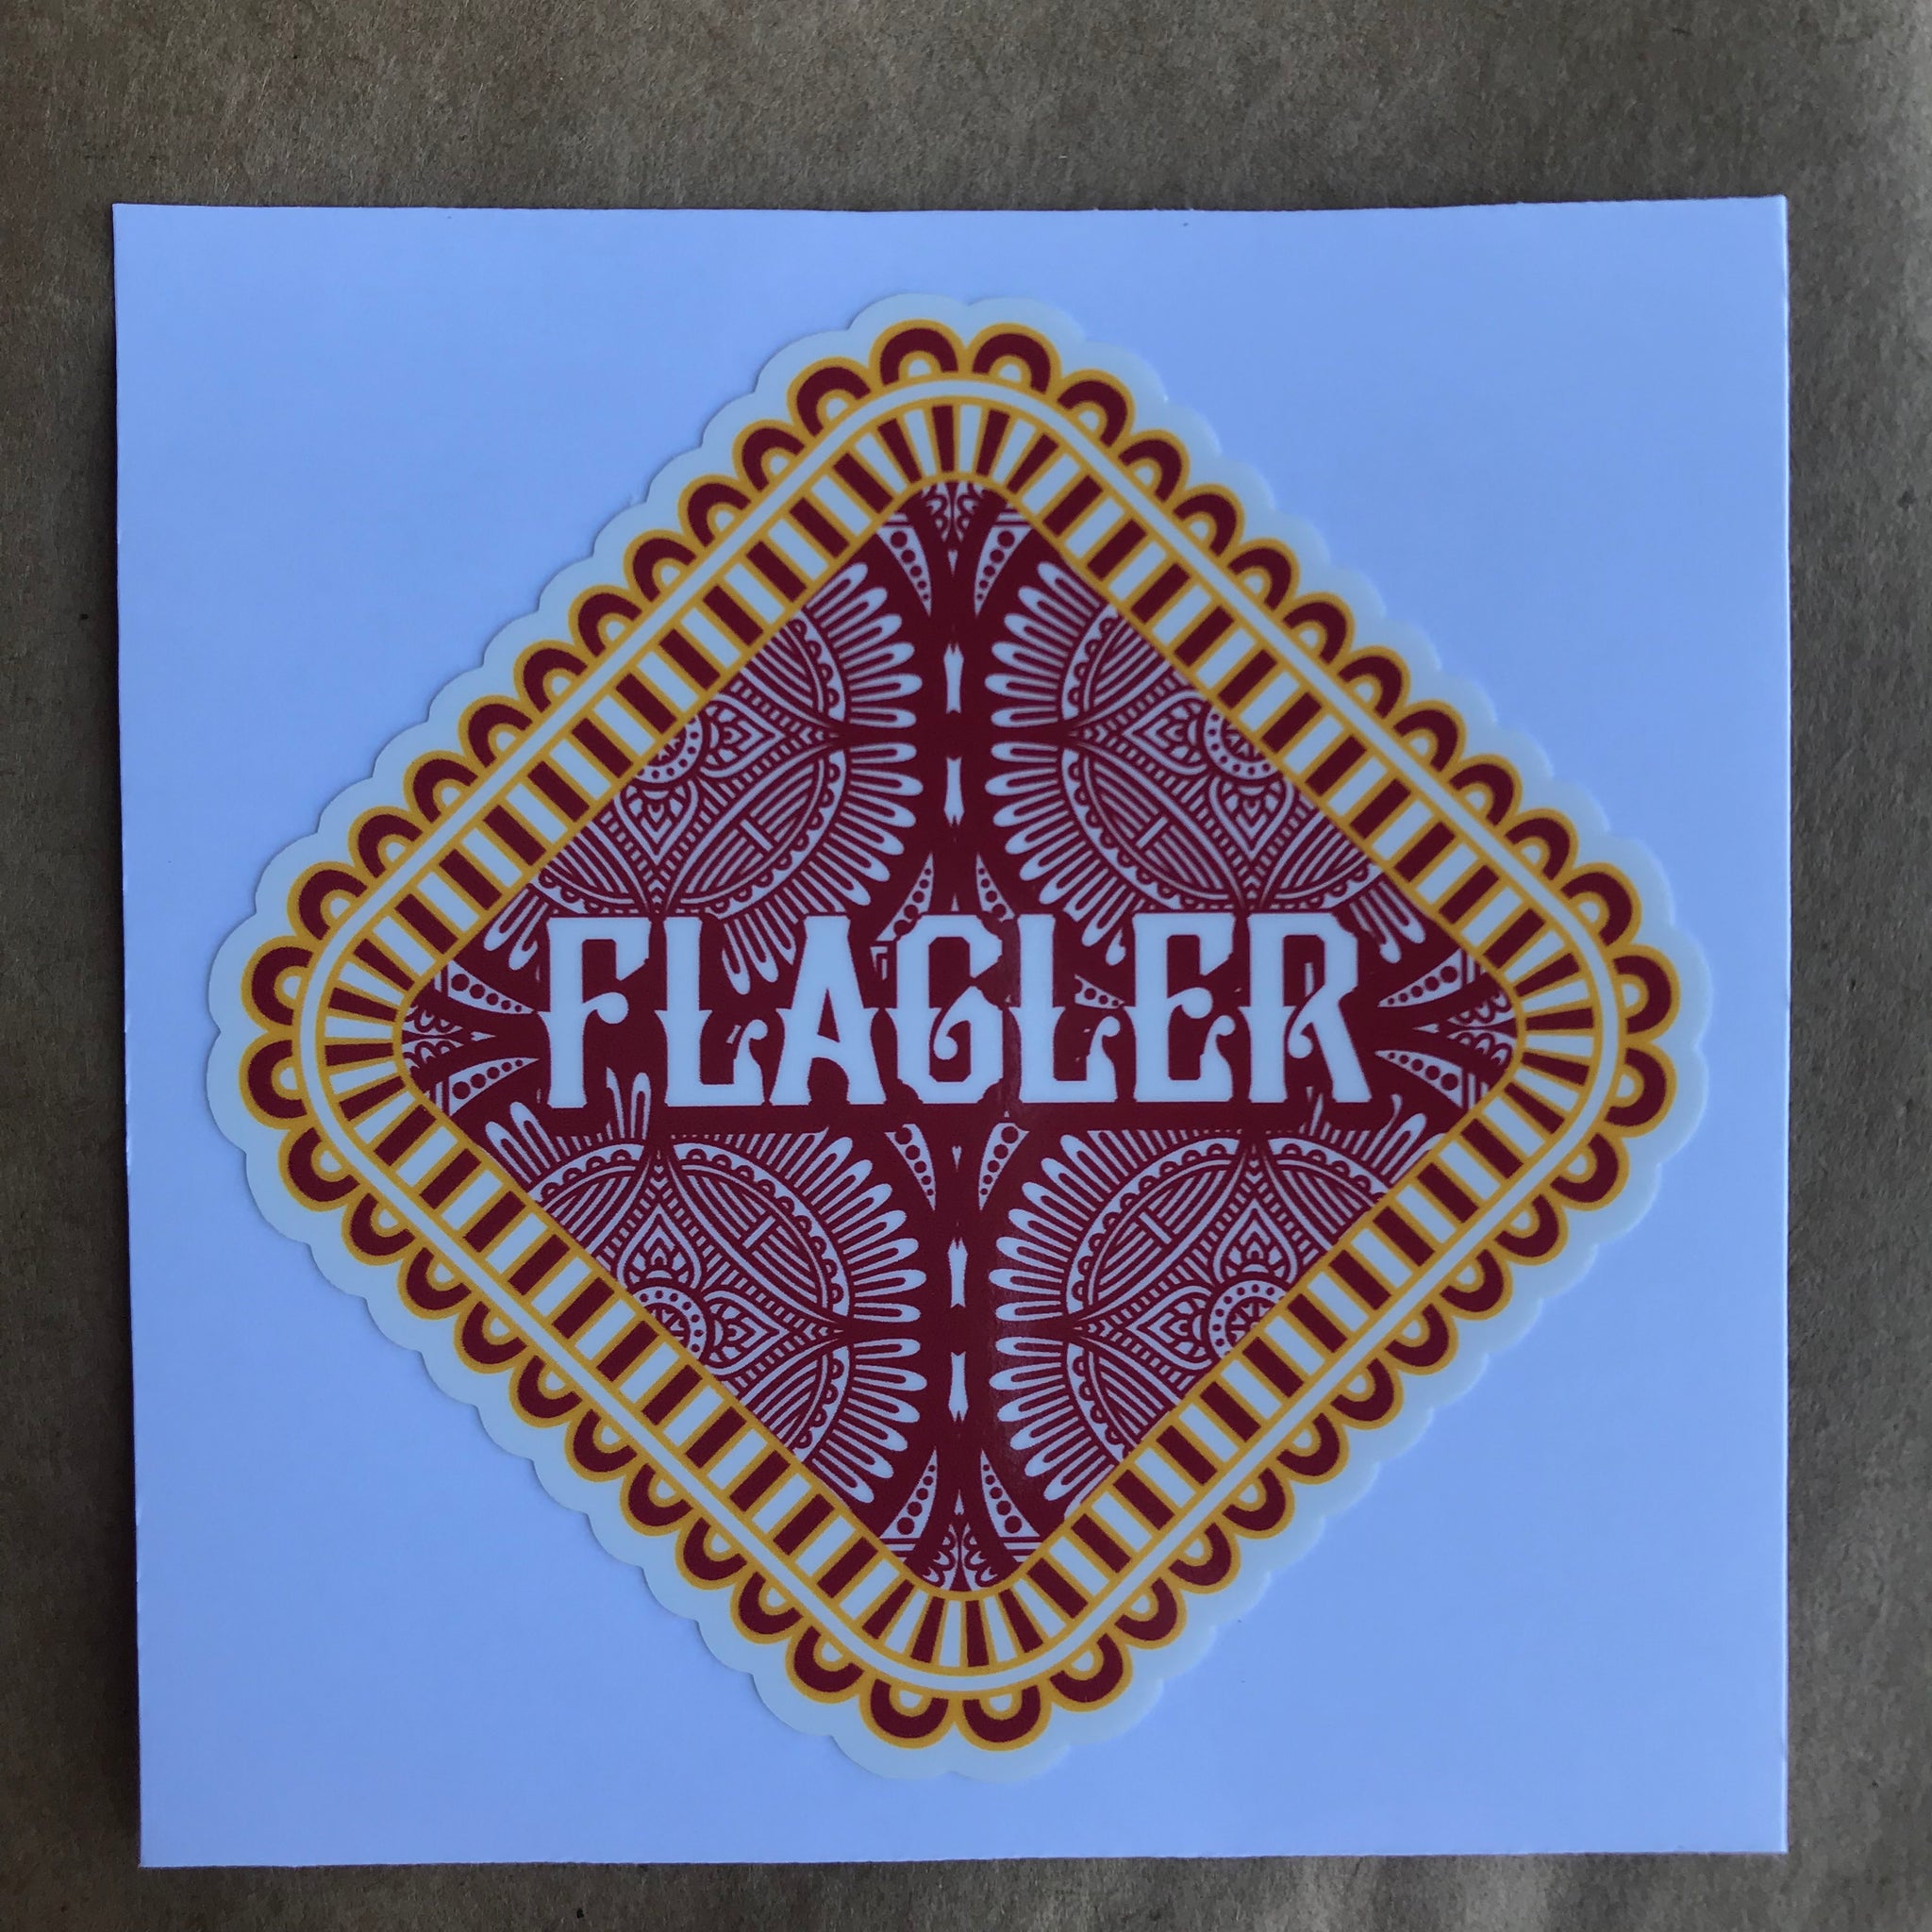 Flagler Diamond Sticker with red and yellow ornate patterns 